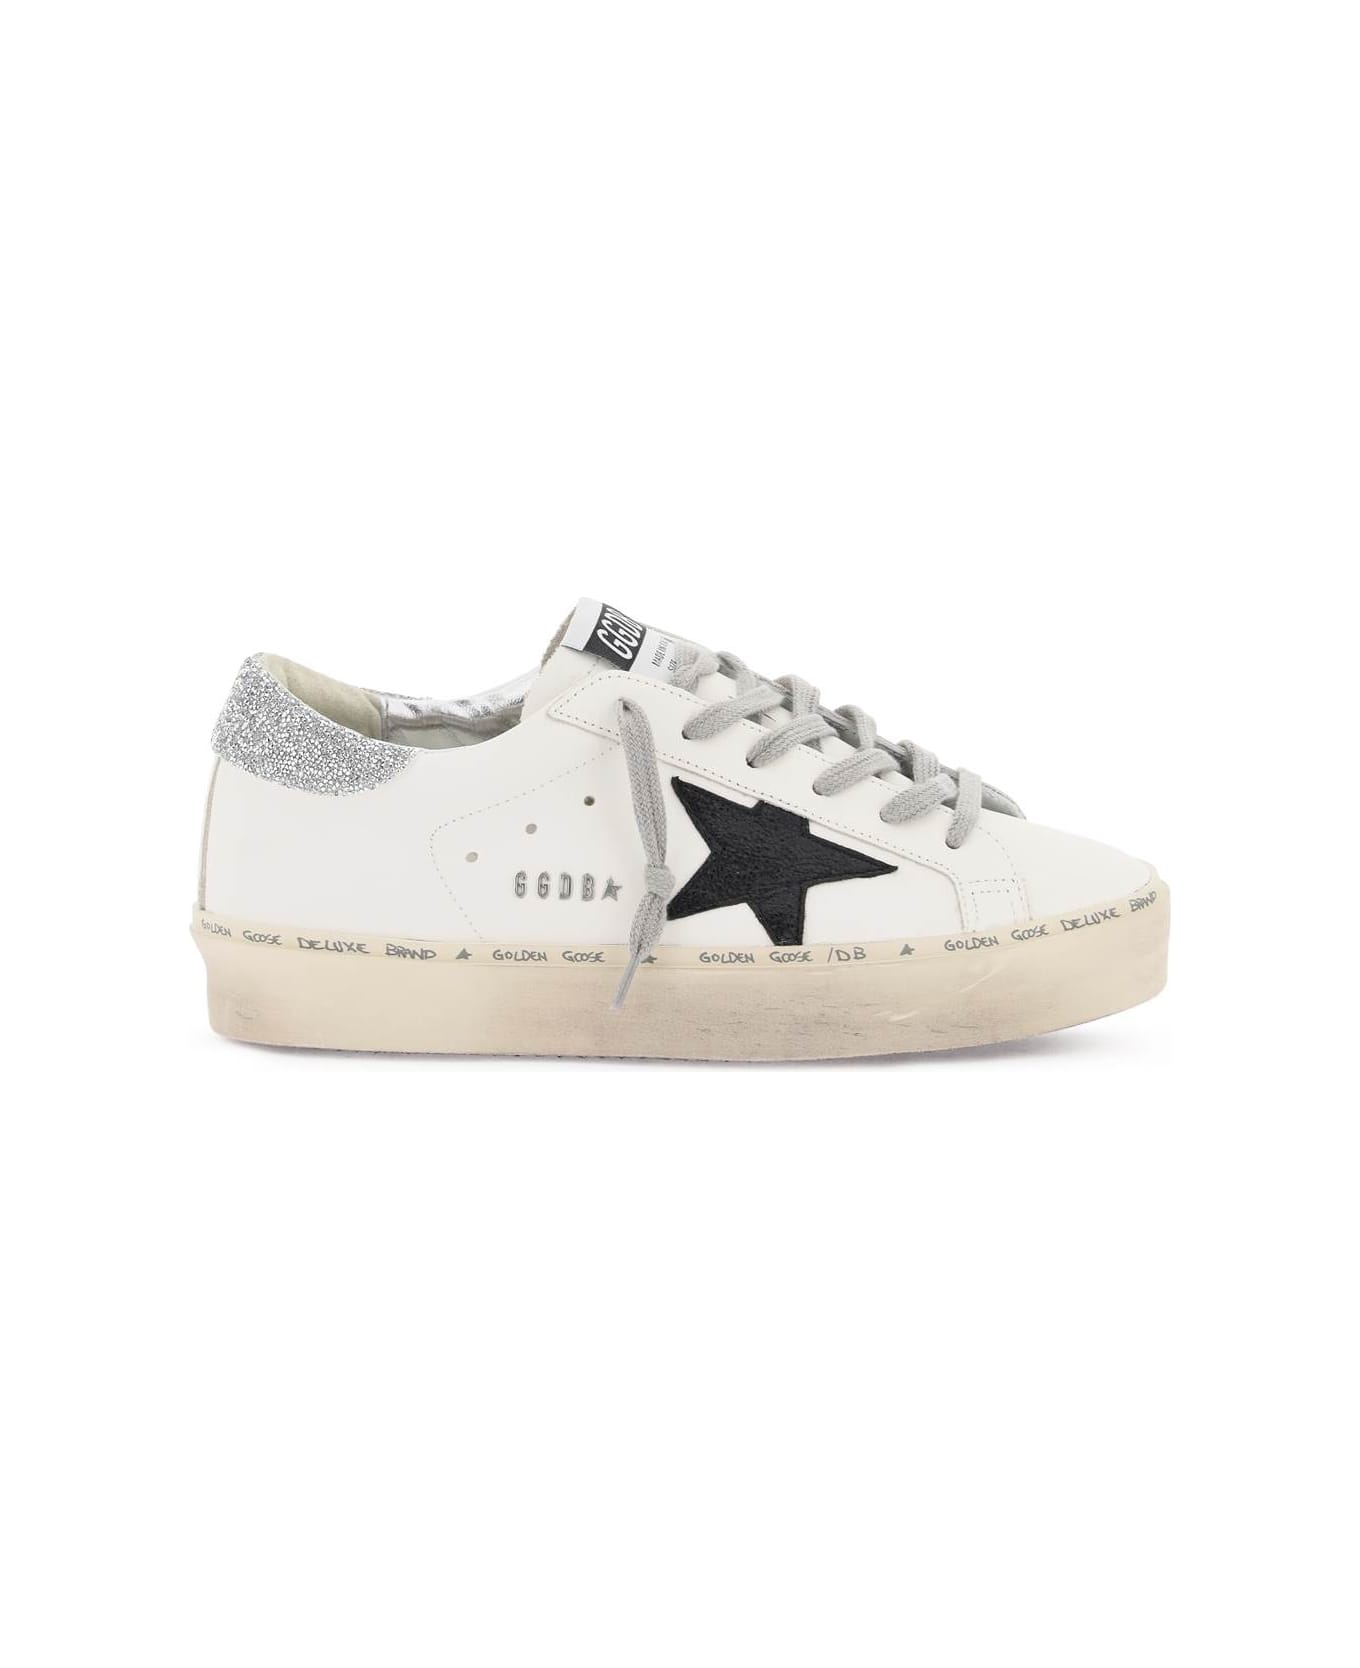 Golden Goose Hi Star Classic Leather Sneakers - WHITE BLACK SILVER (Black)